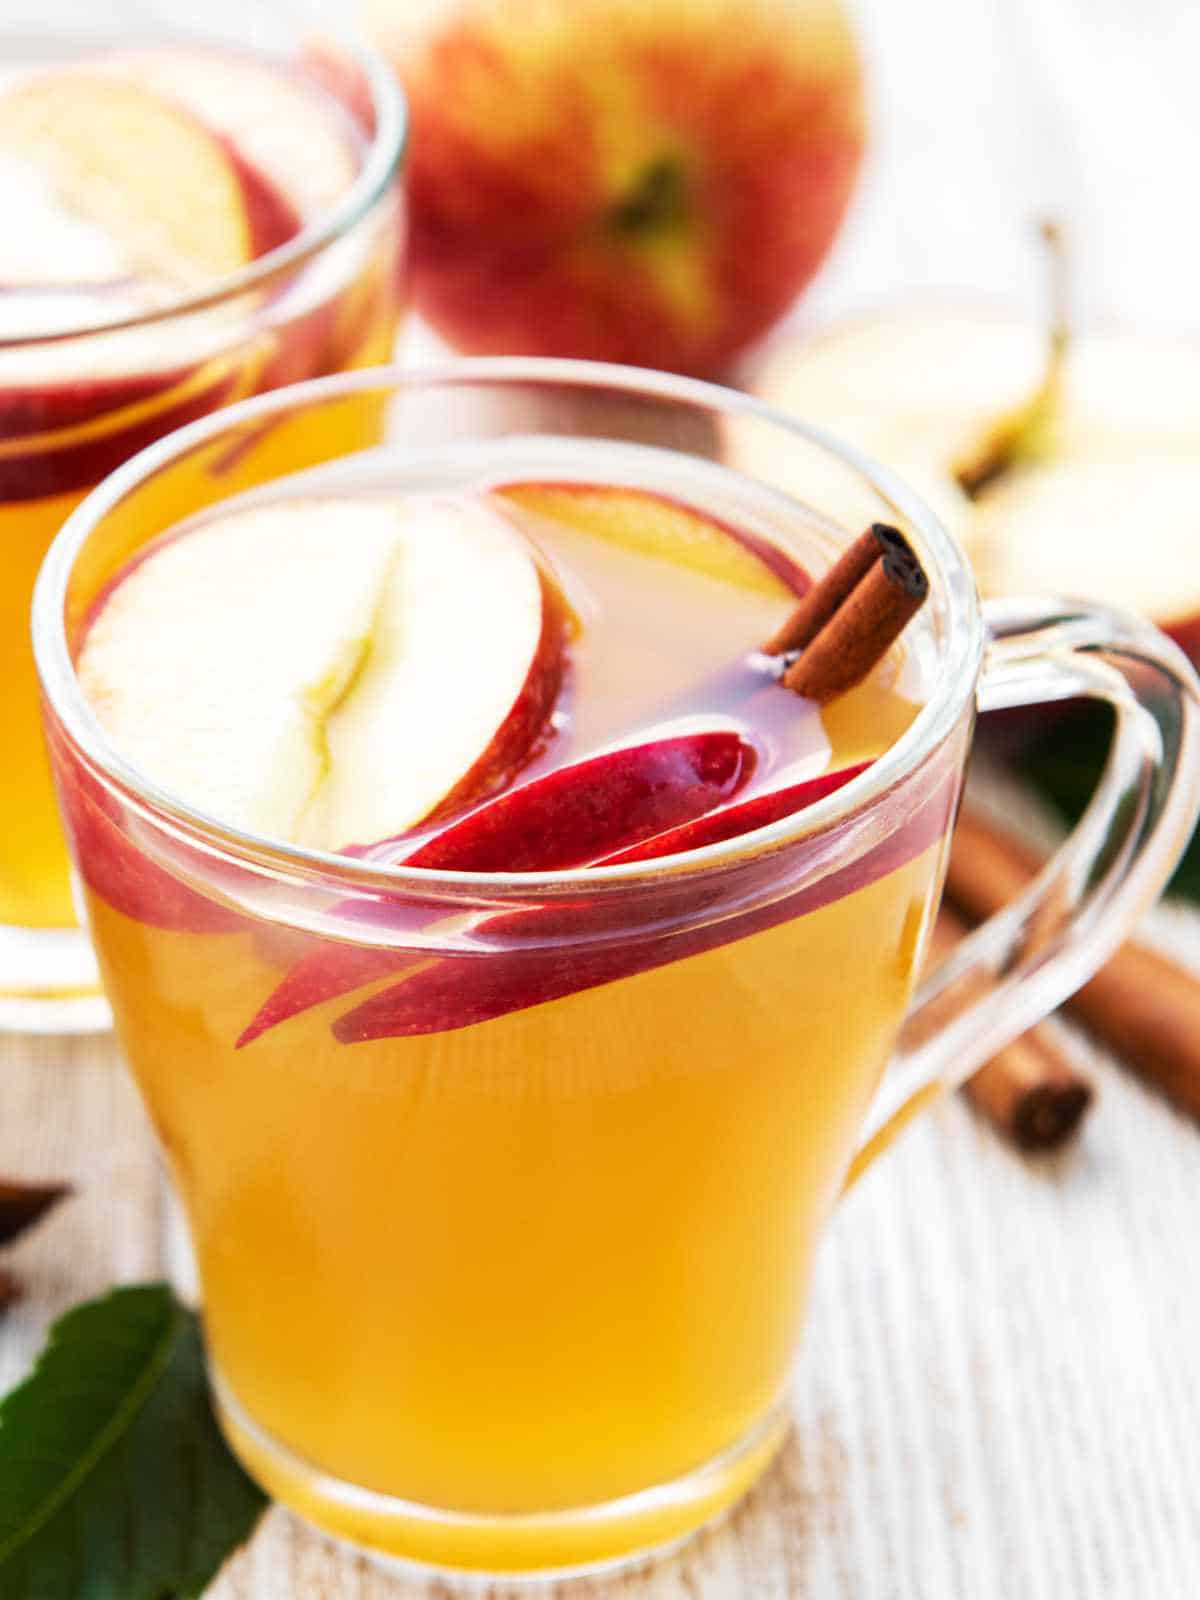 Apple juice in a glass with apple slices and cinnamon sticks.